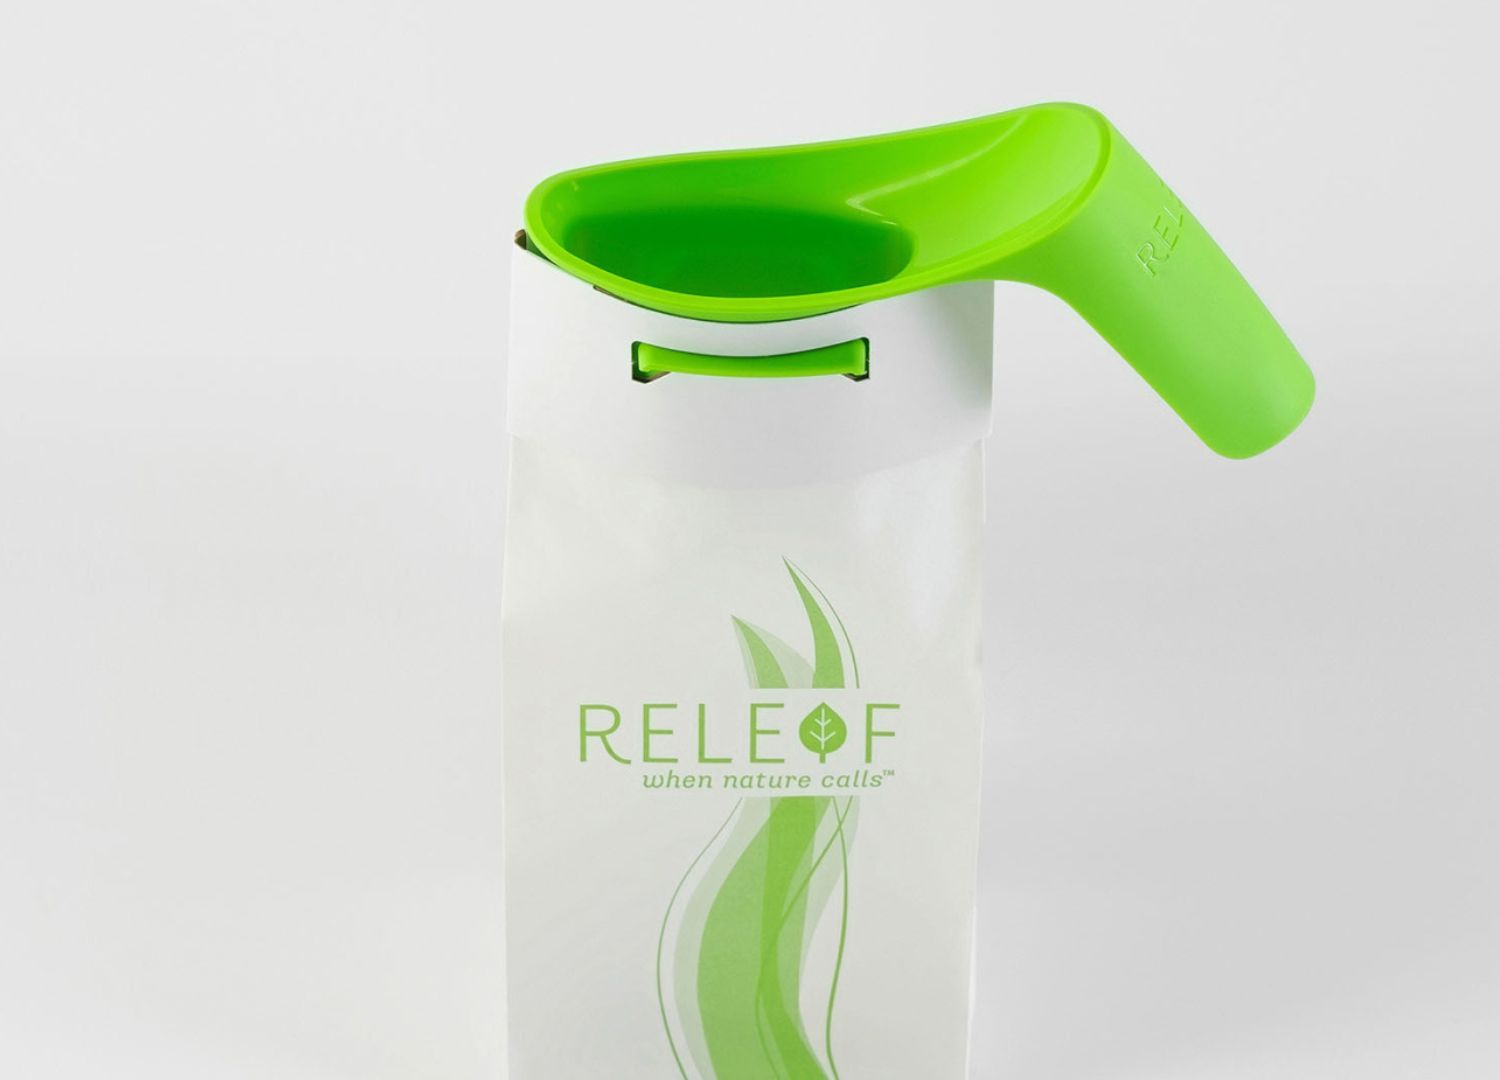 Releaf Freedom by Tone Product Design